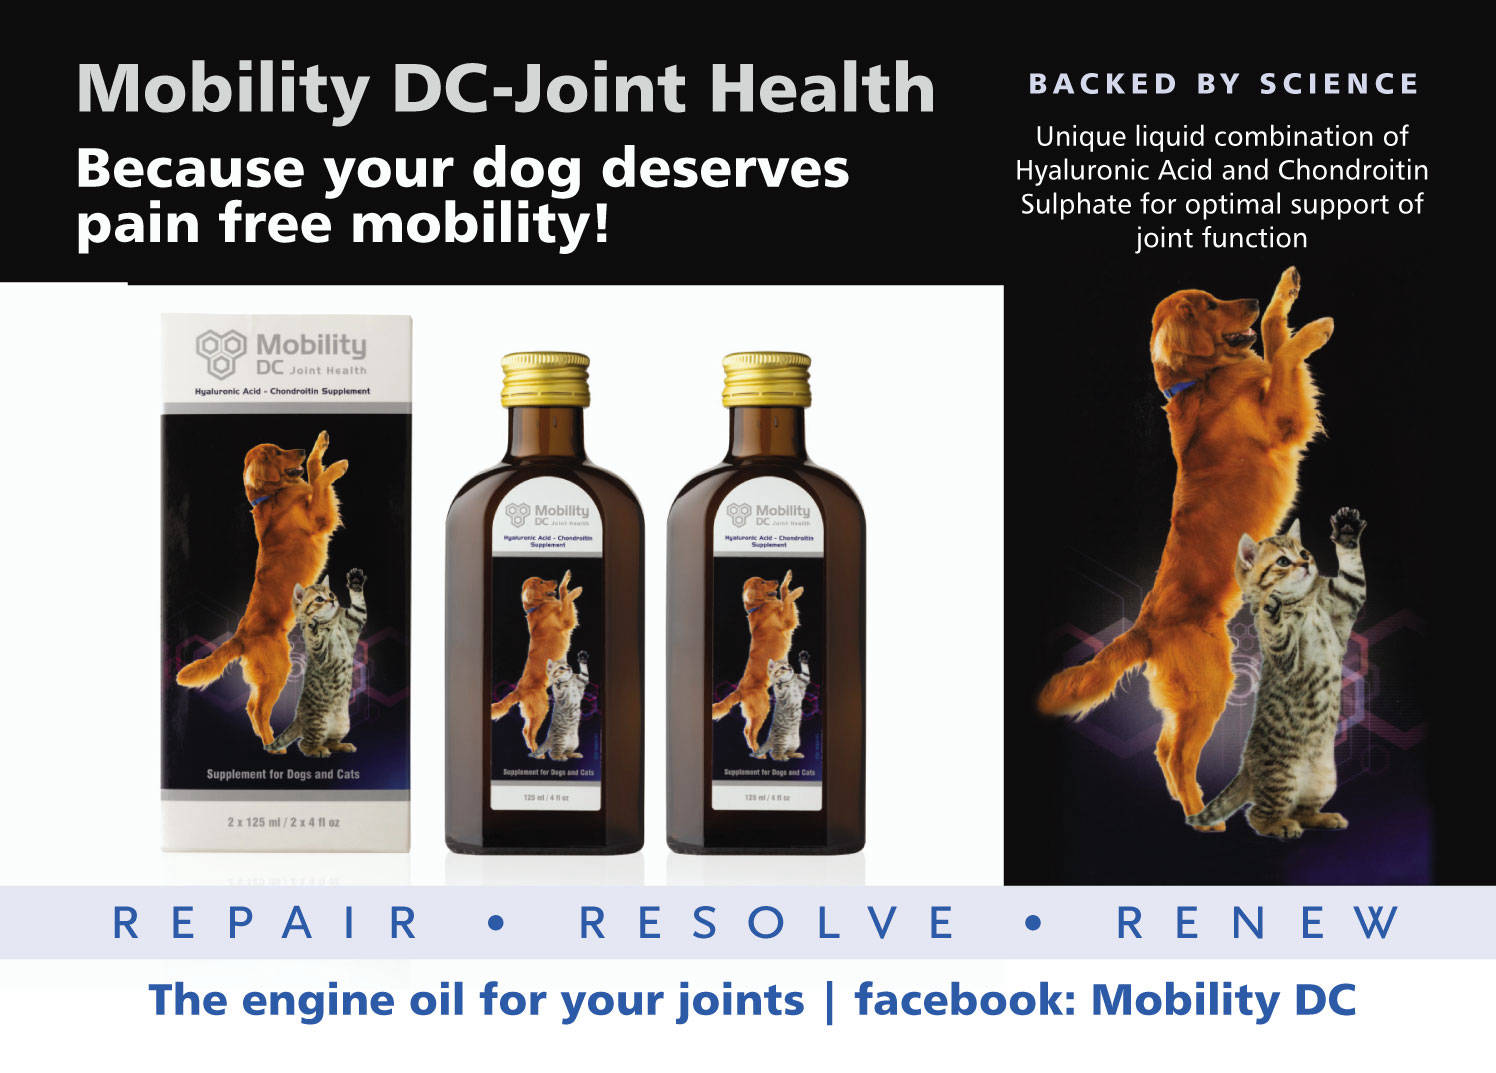 Postcard Design for Mobility DC Joint Health